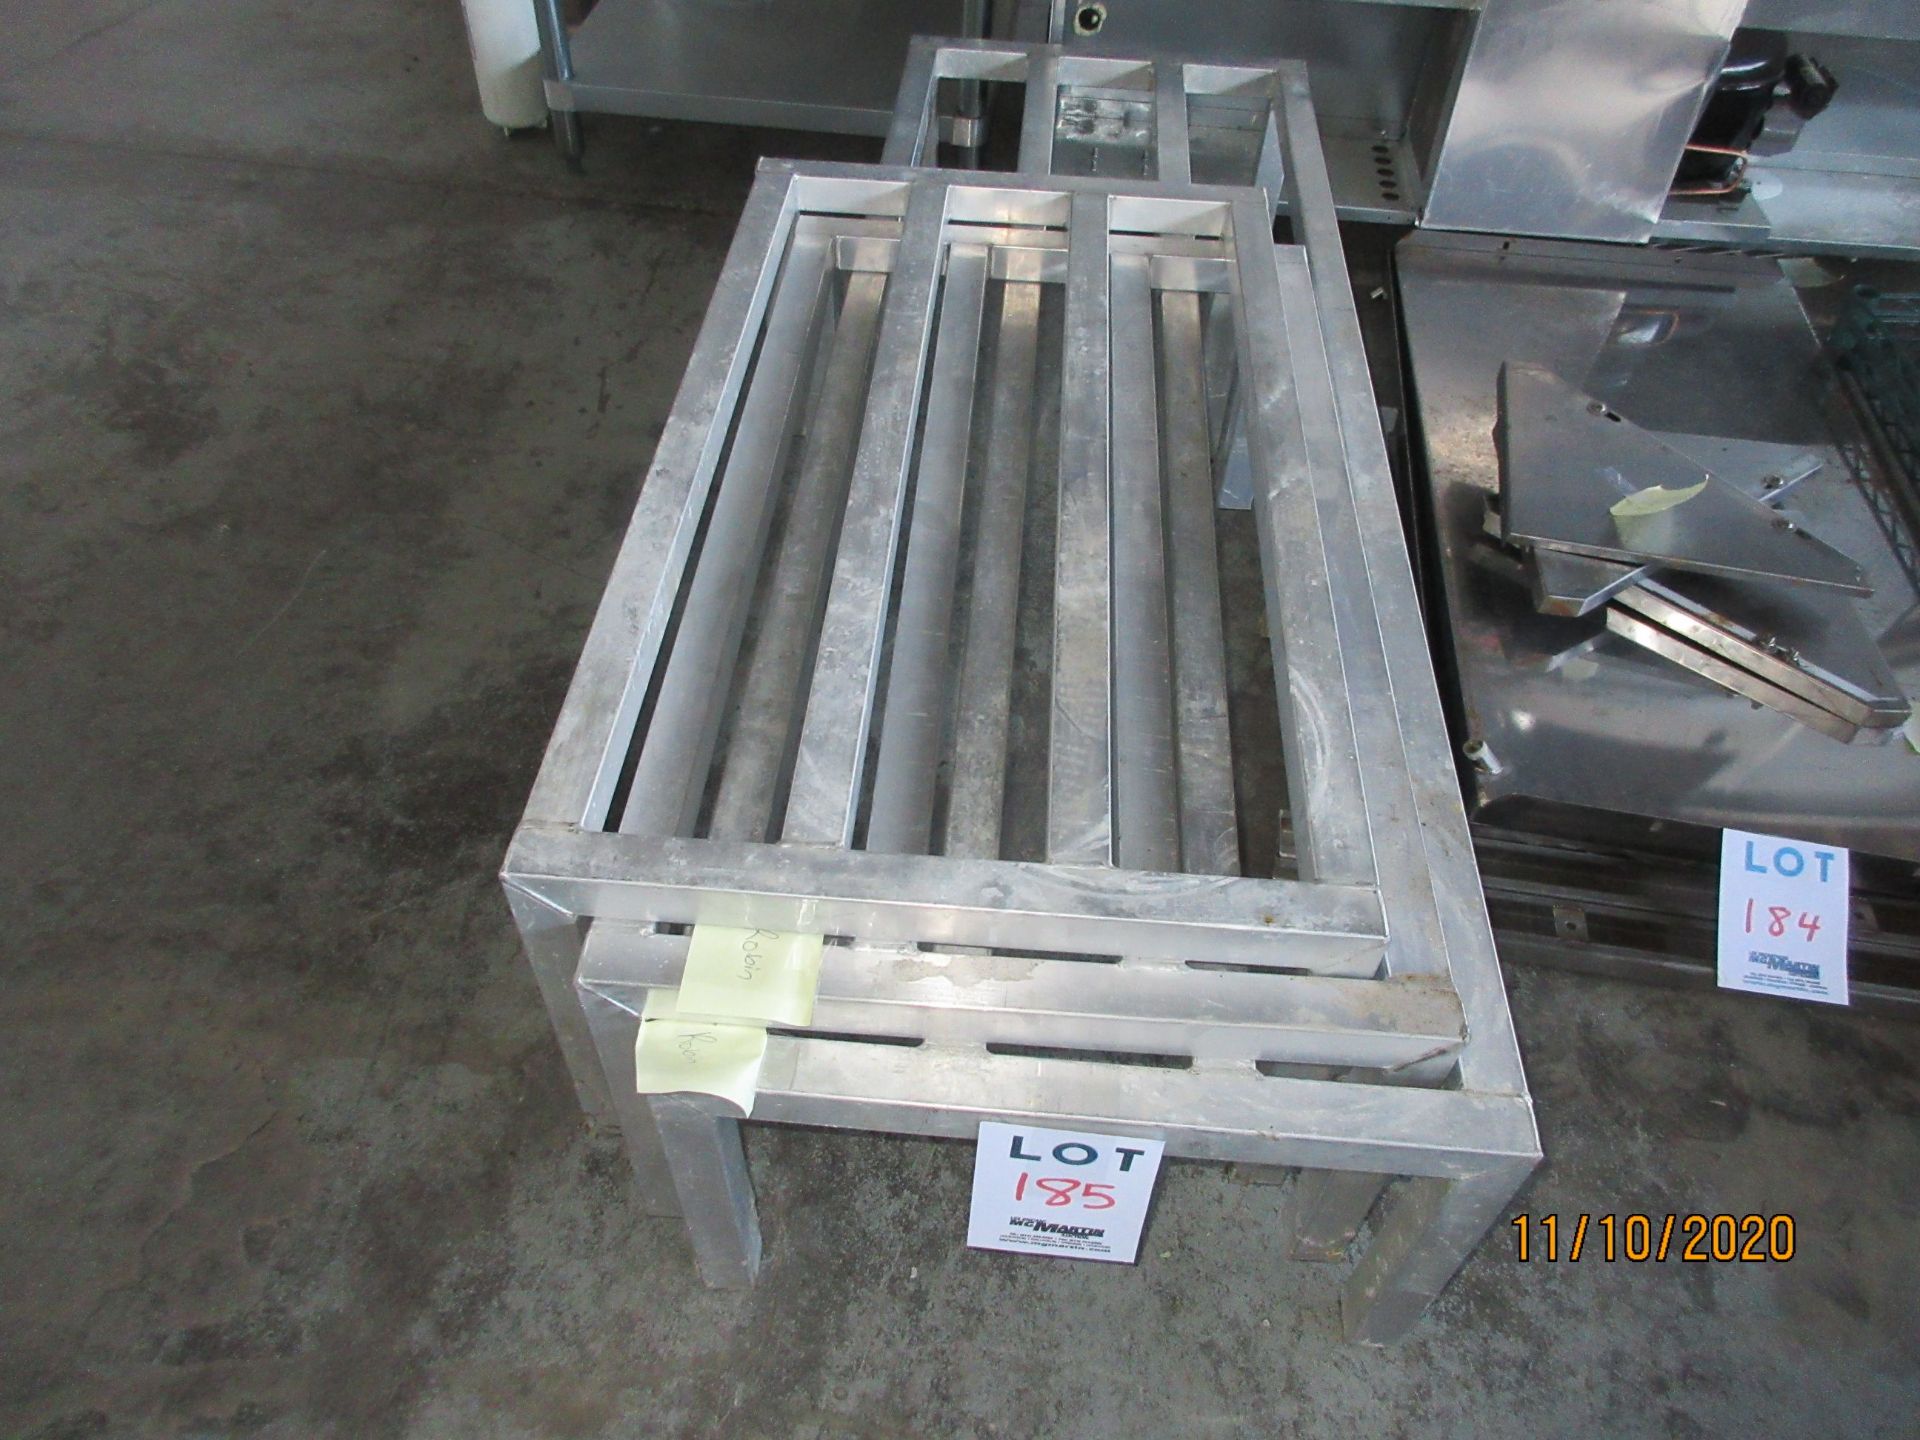 LOT Including (3) aluminium platforms in assorted sizes ( approx. 36"w, 60"w x 20"d x 12"h)